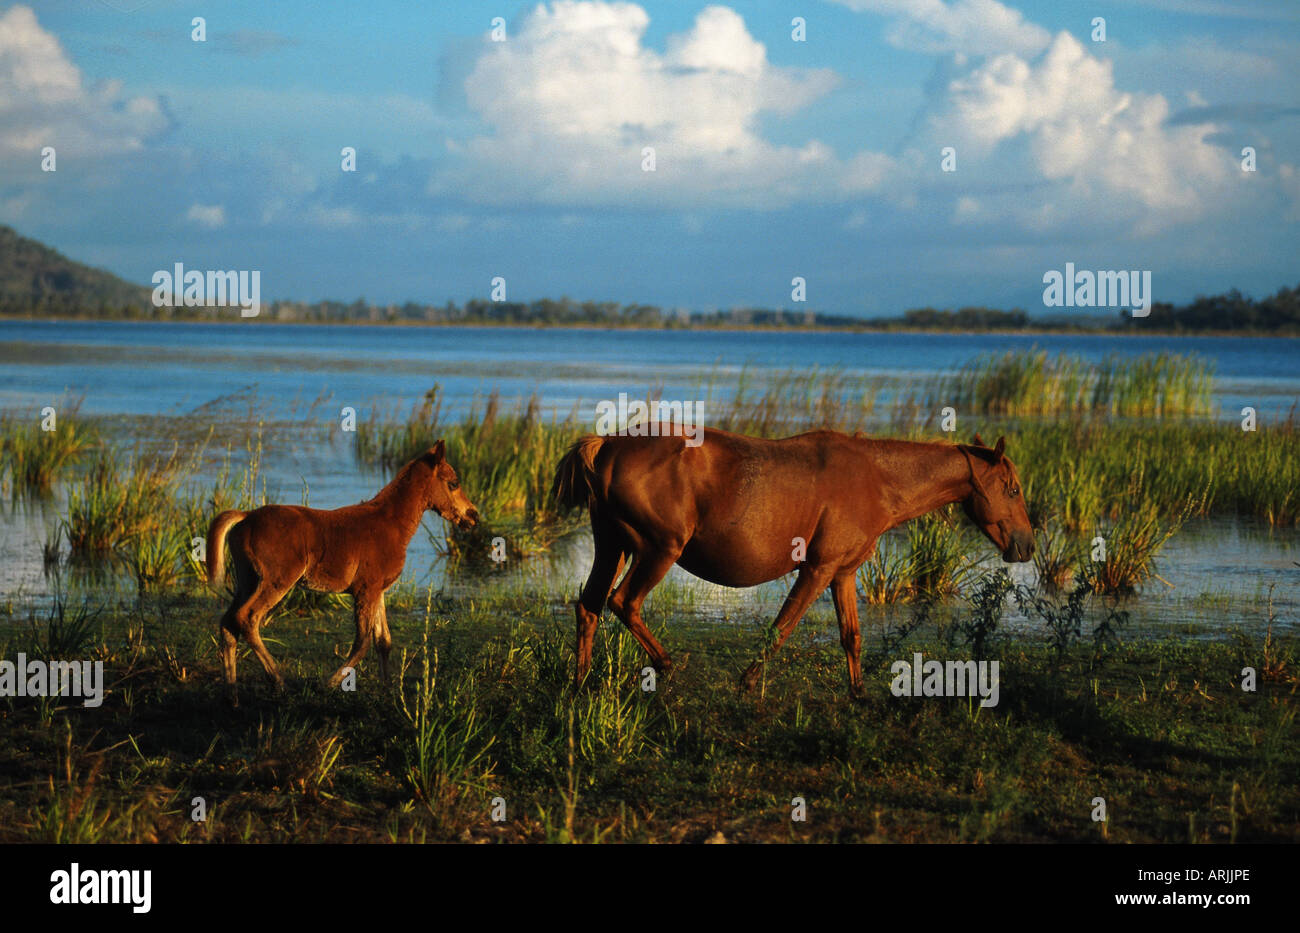 Brumby horse (Equus przewalskii f. caballus), mare with foal, Australia Stock Photo